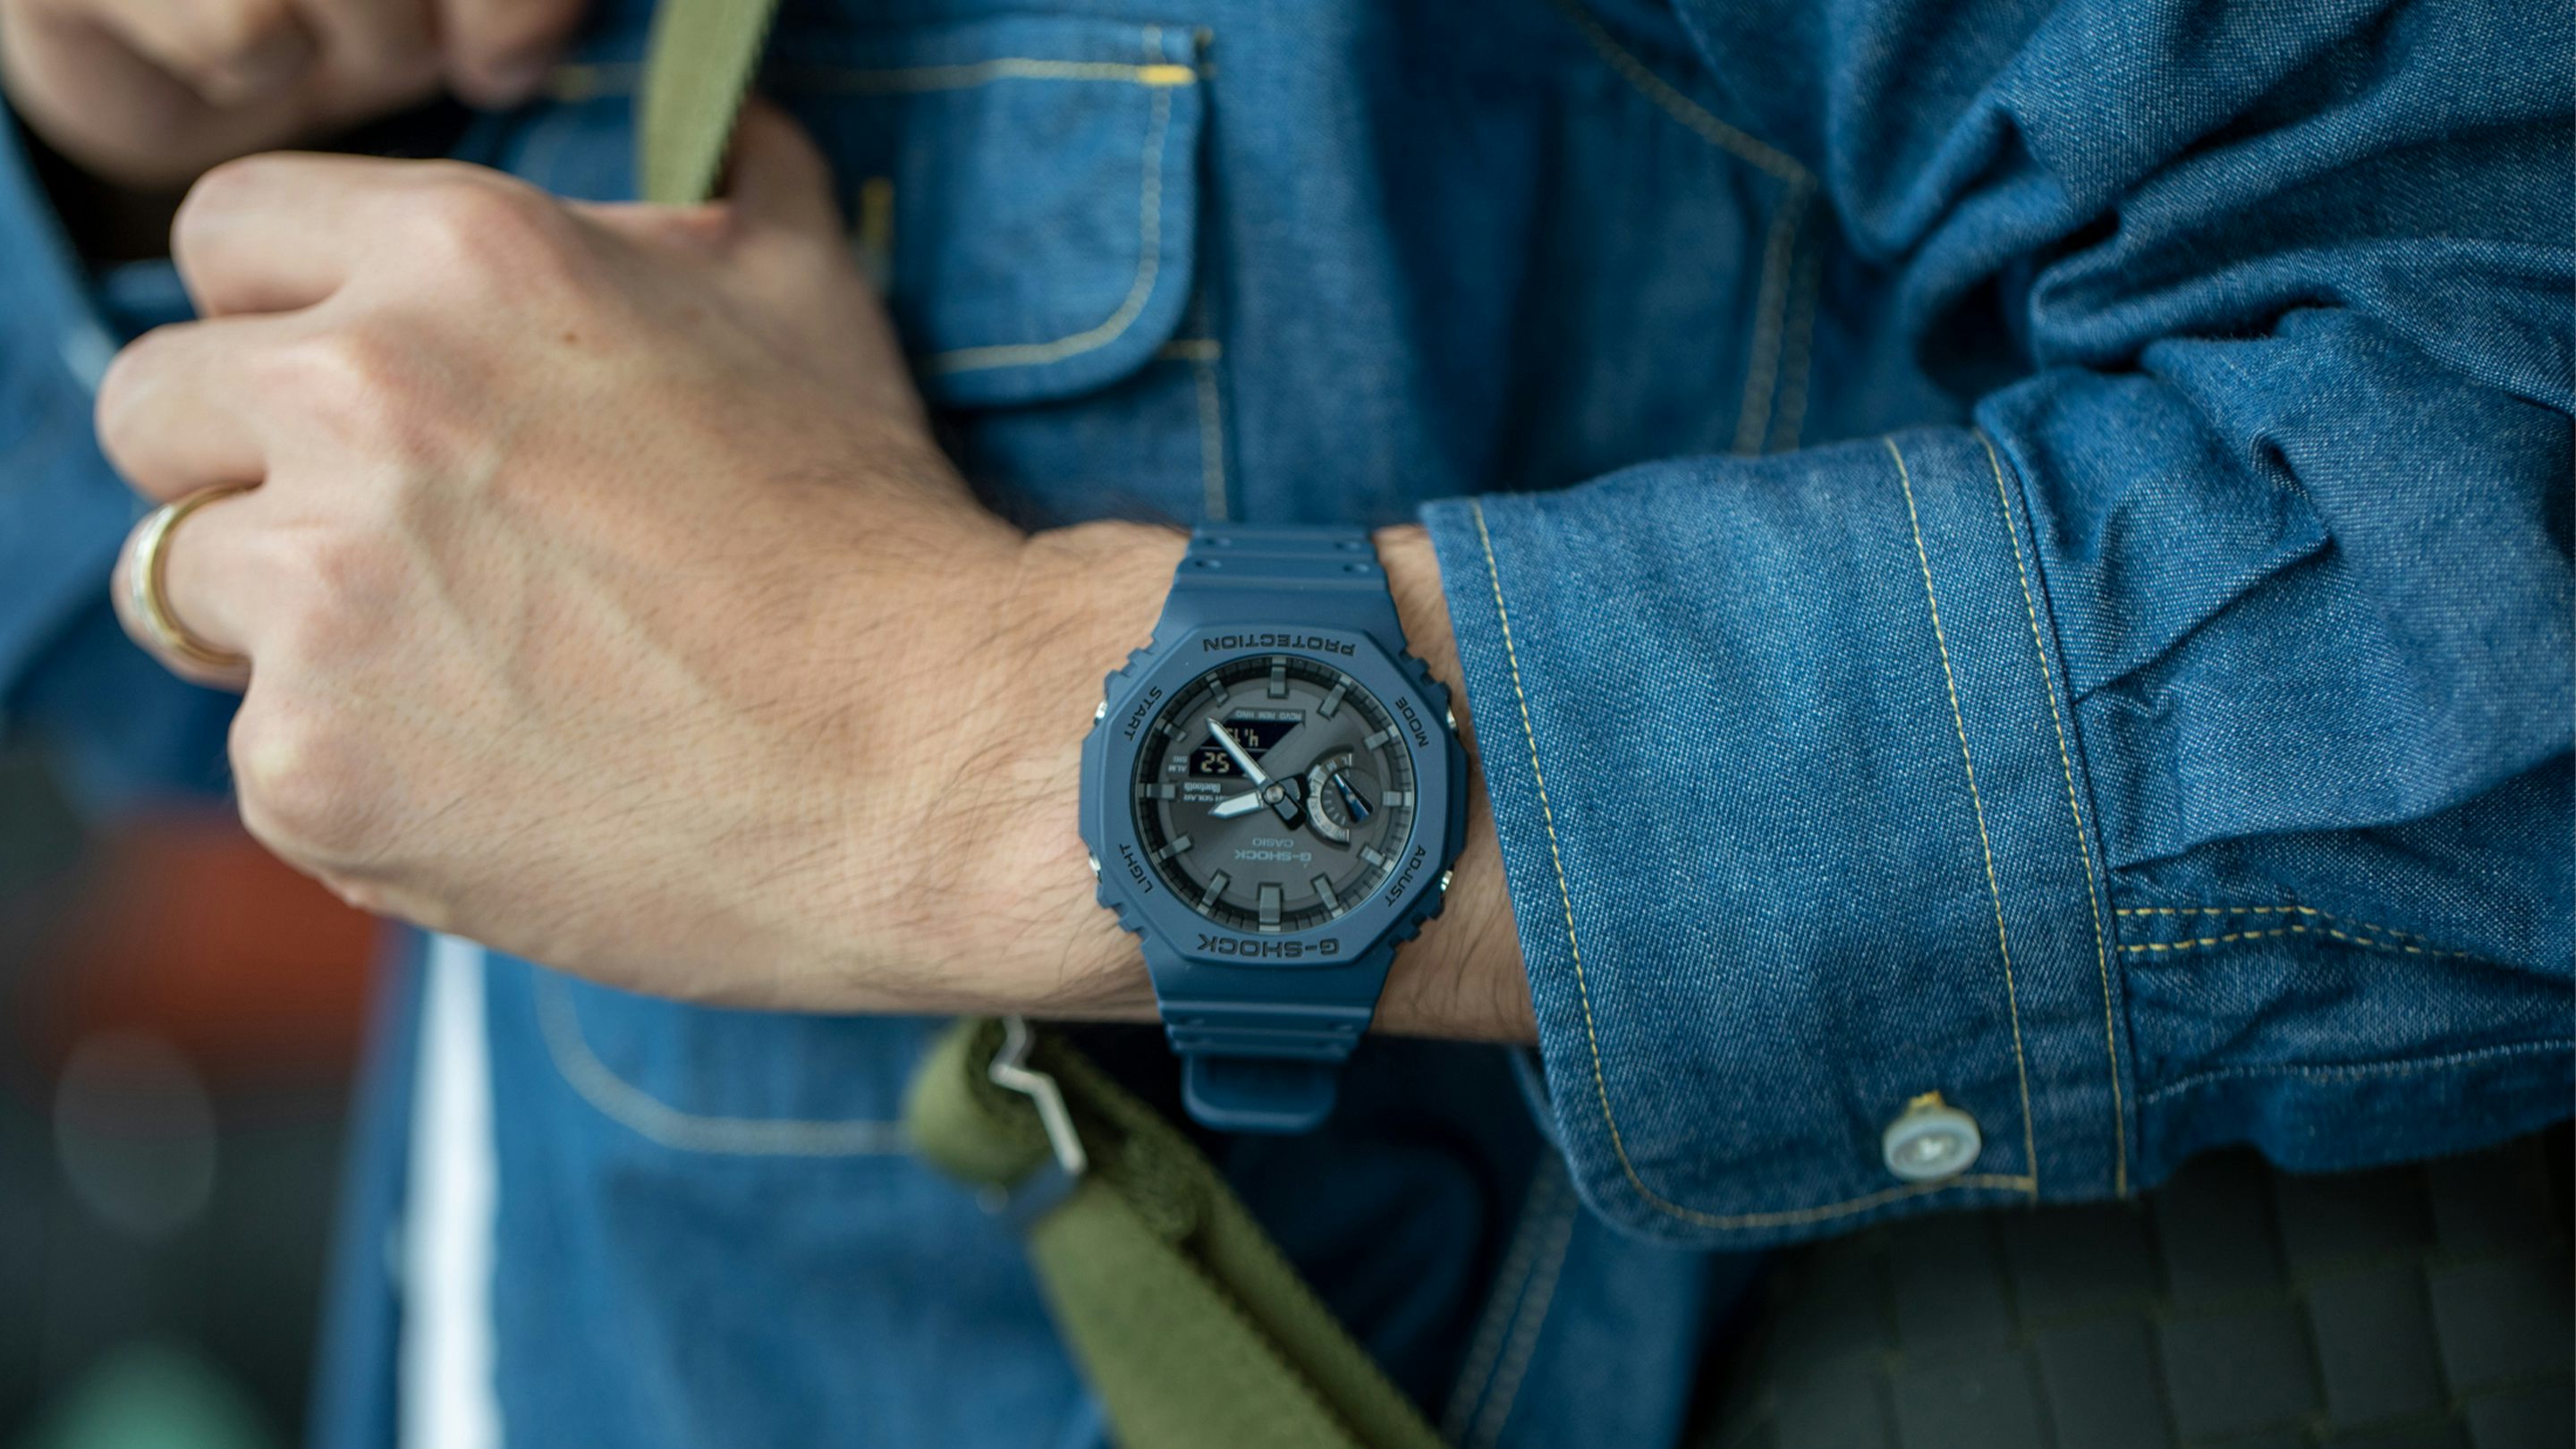 Orator konsol journalist The new G-Shock GA-B2100 Adds Serious Functionality To The CasiOak Design